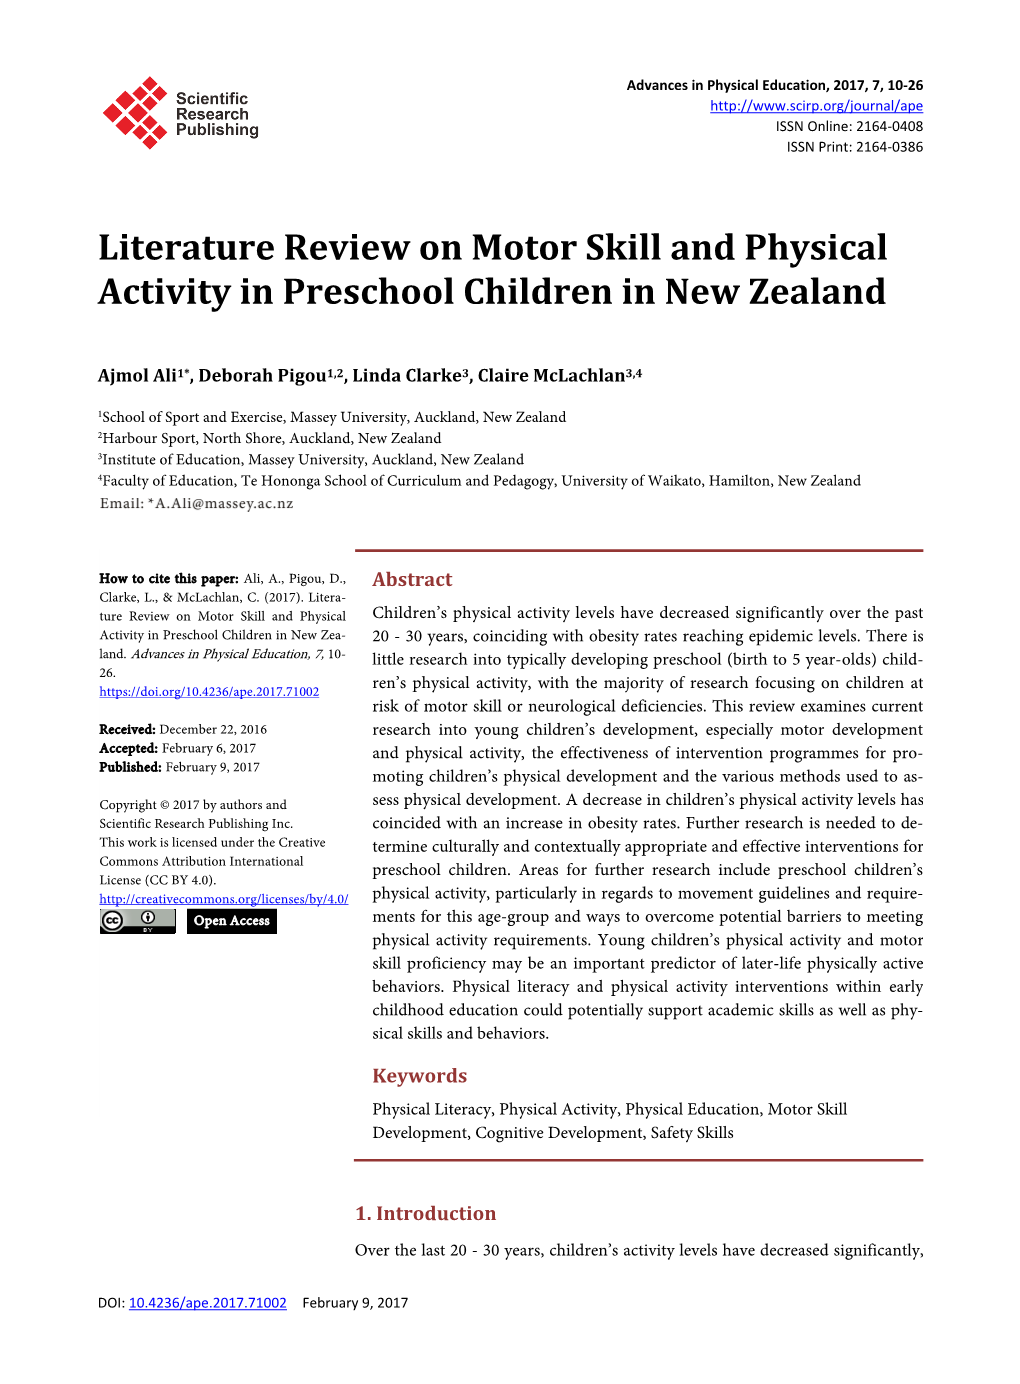 Literature Review on Motor Skill and Physical Activity in Preschool Children in New Zealand